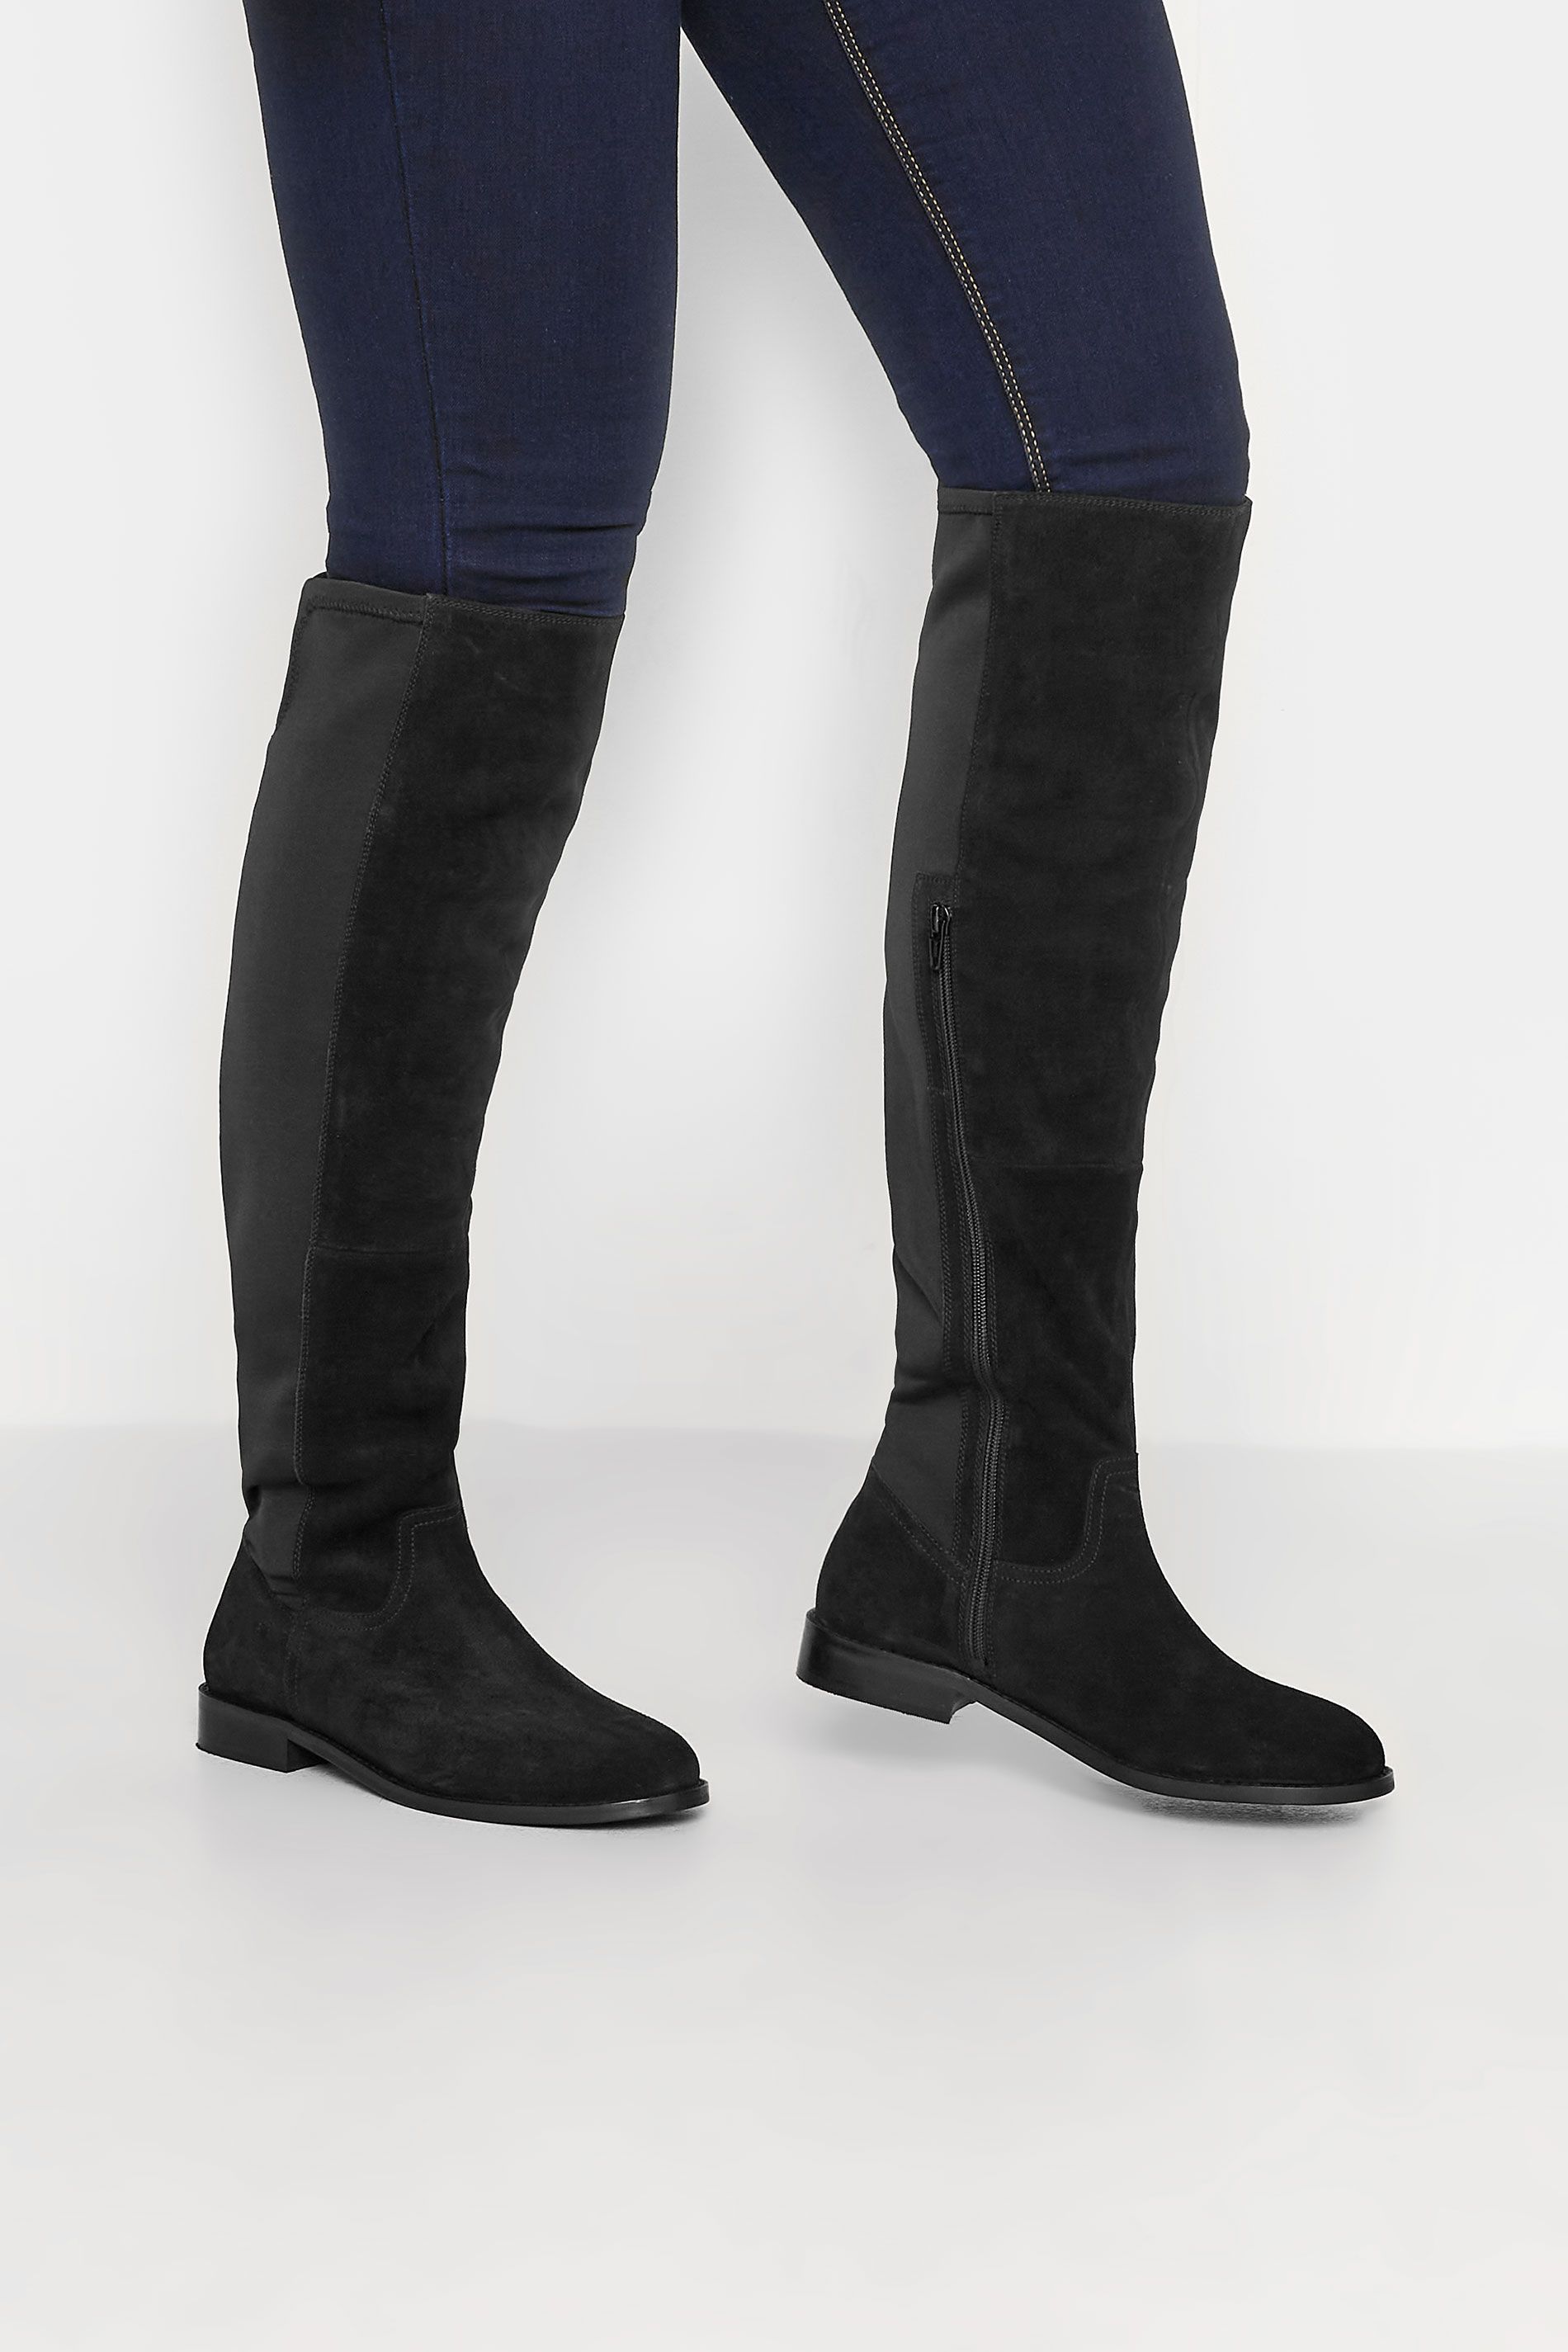 LTS Black Over The Knee 50/50 Suede Boot In Standard D Fit | Long Tall Sally